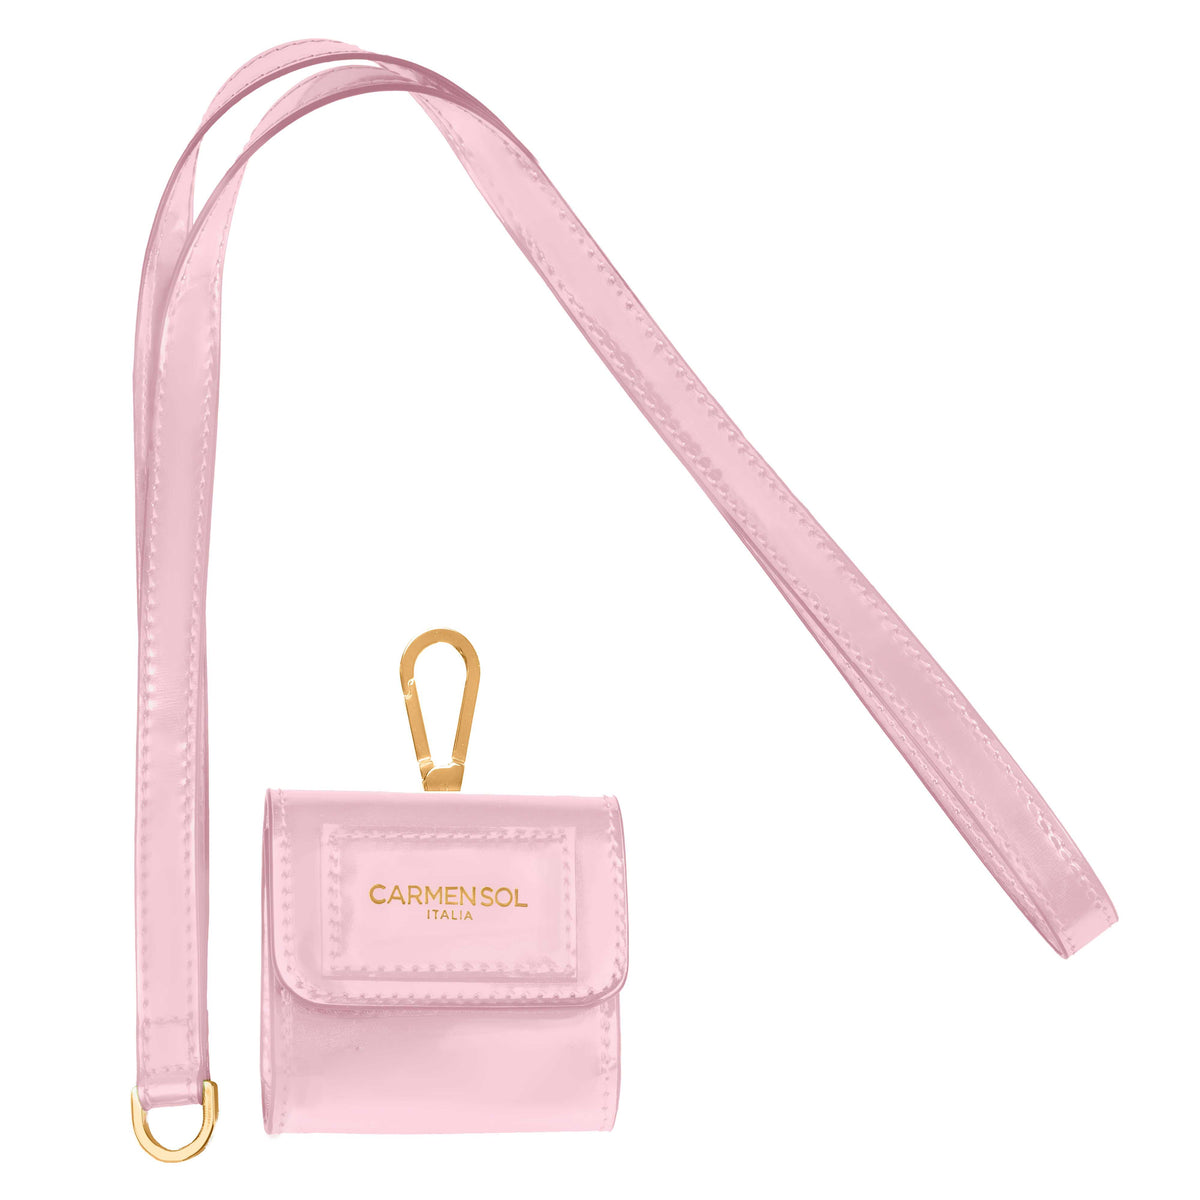 Carmen Sol baby pink airpod case which are vegan